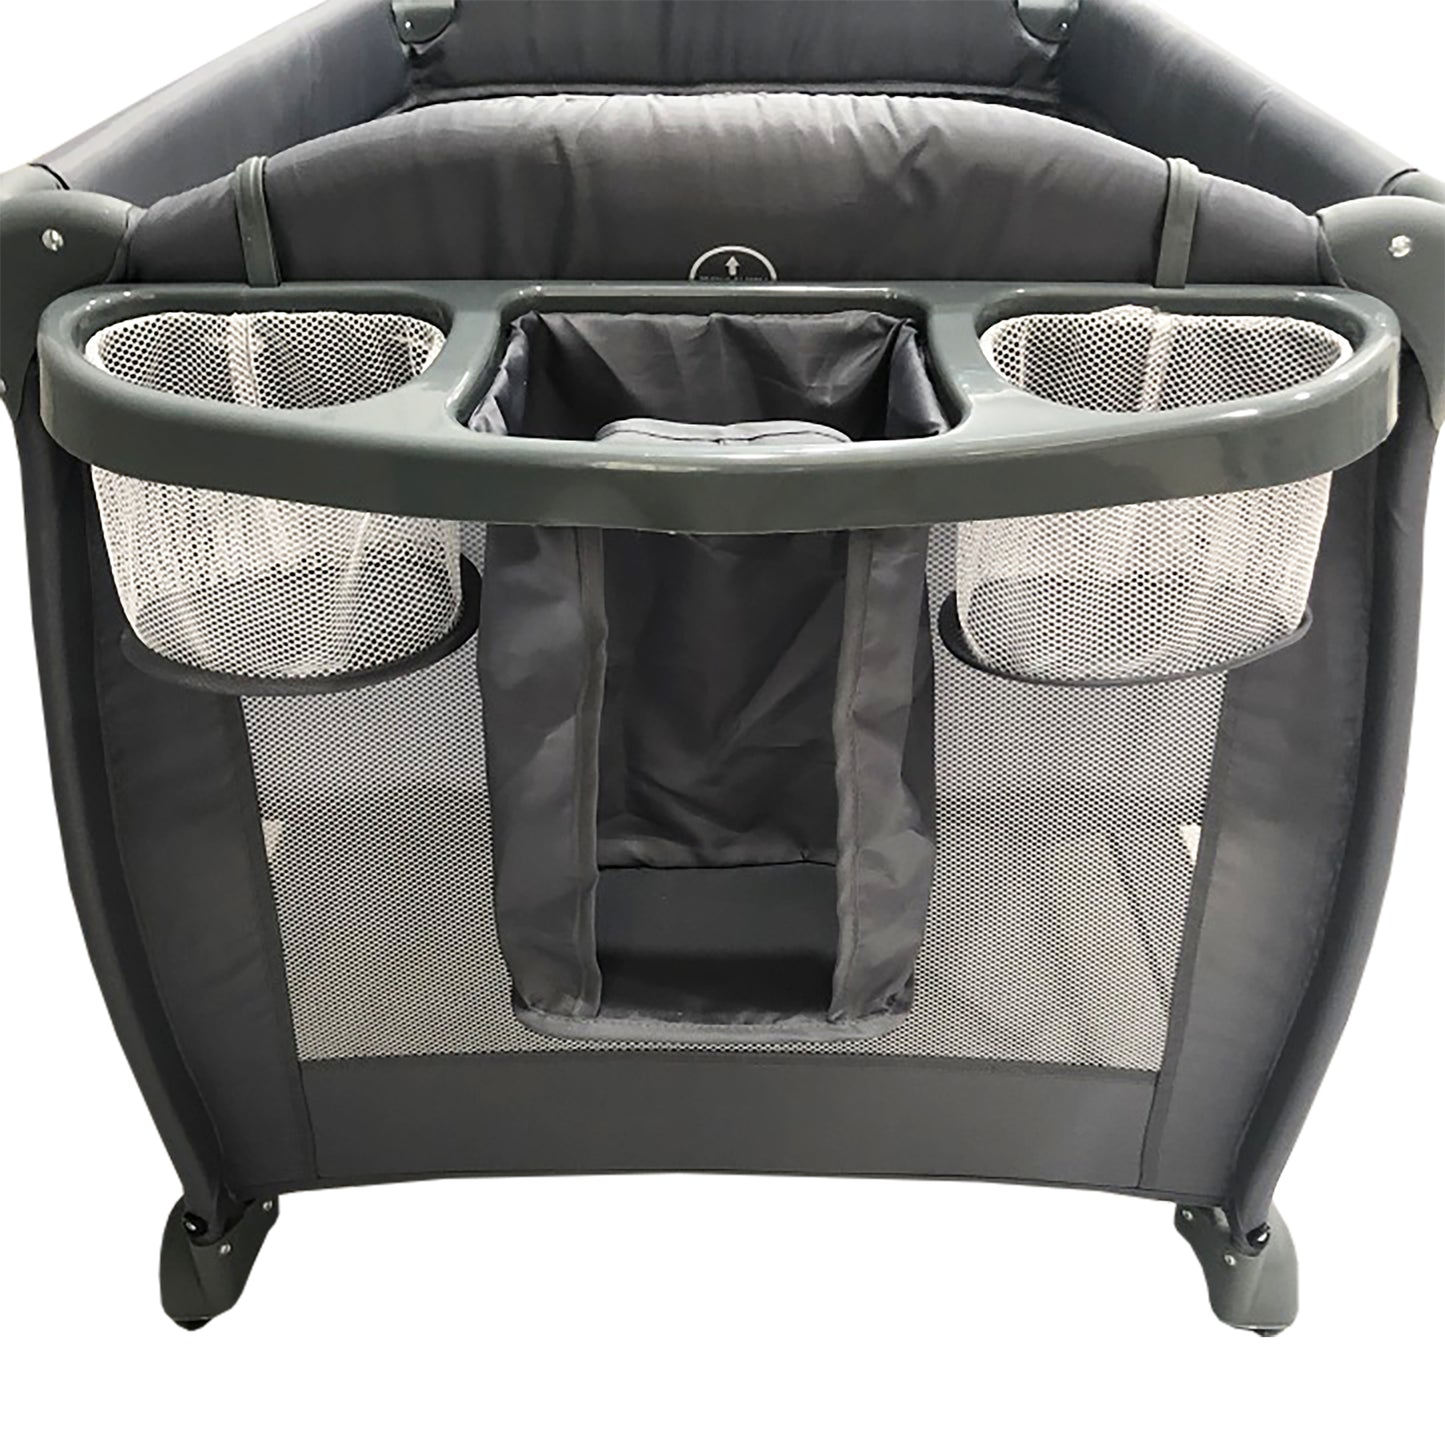 S11 Travel Deluxe Playpen With Canopy